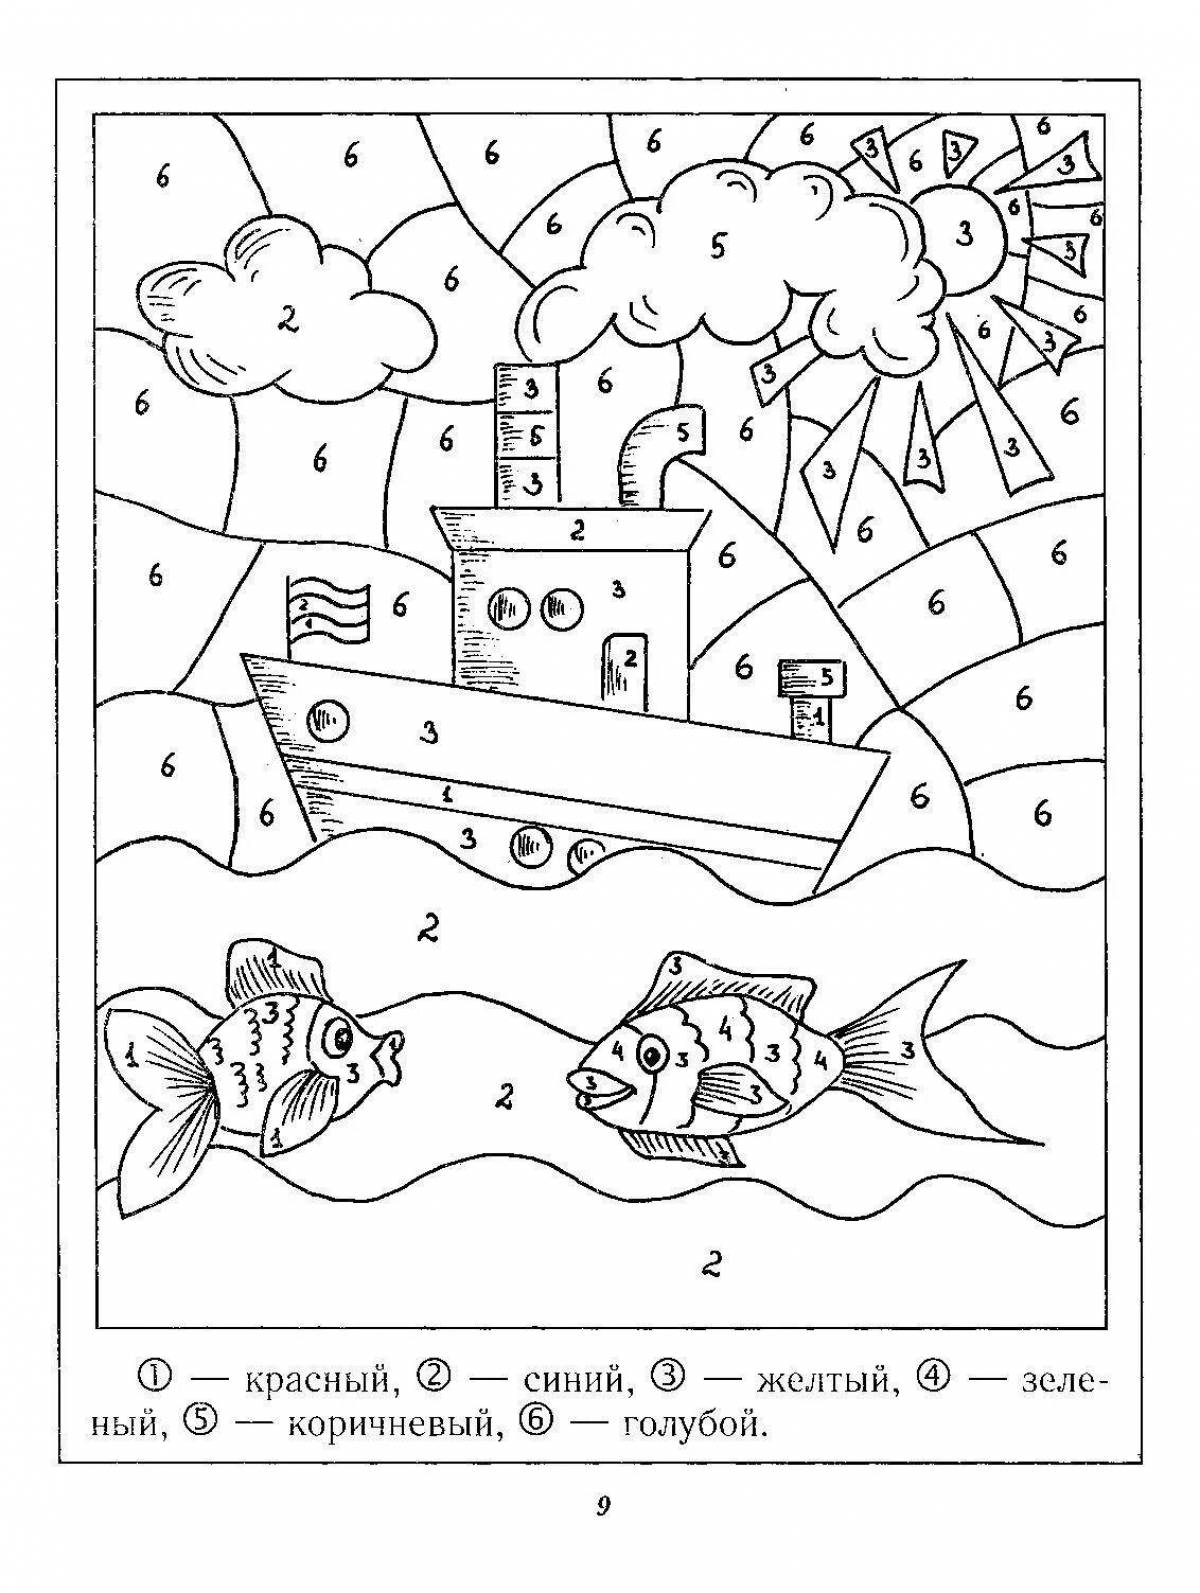 Fun coloring by numbers for boys 6-7 years old